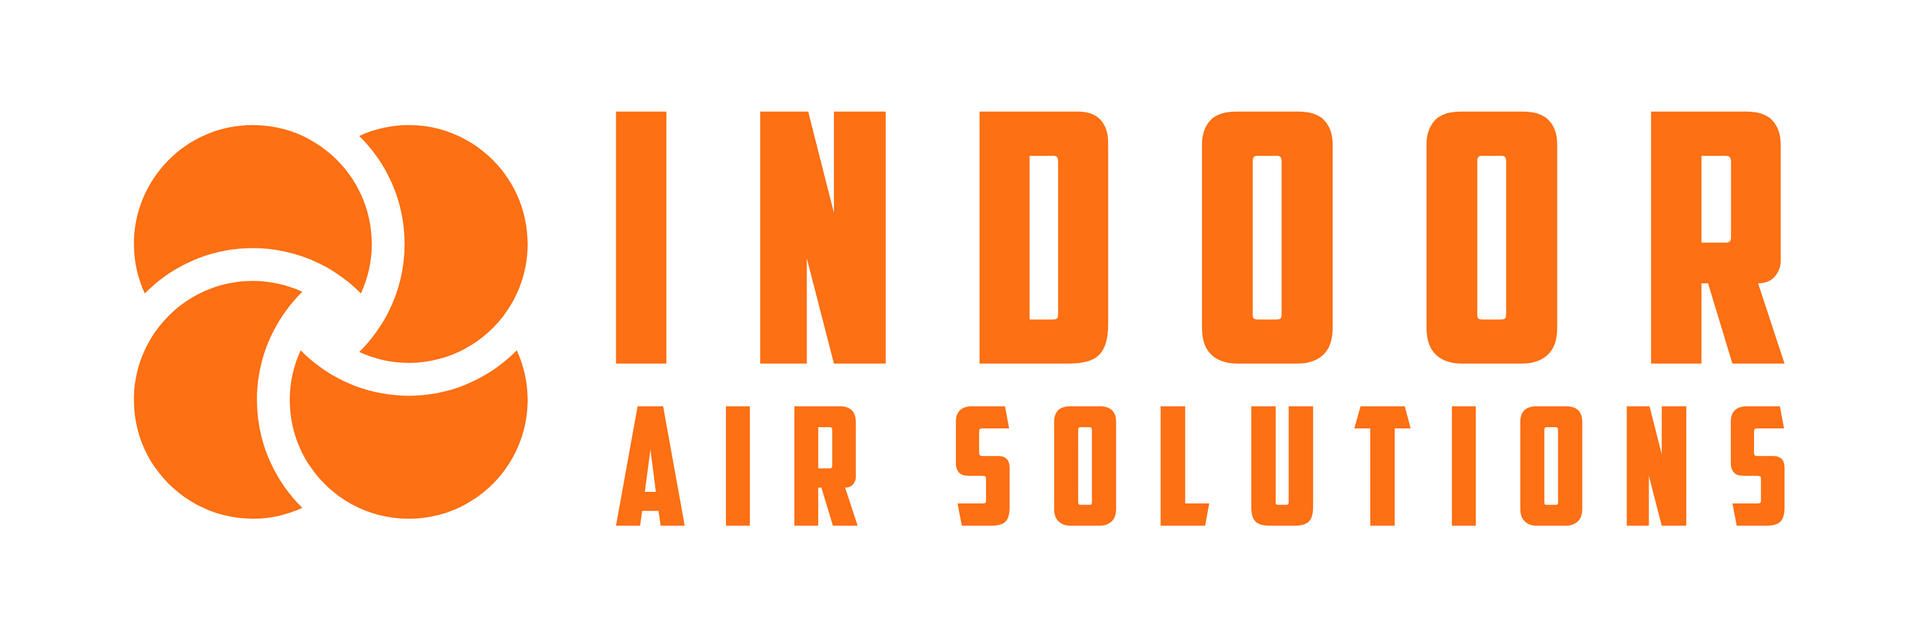 the logo for indoor air solutions is orange and white .